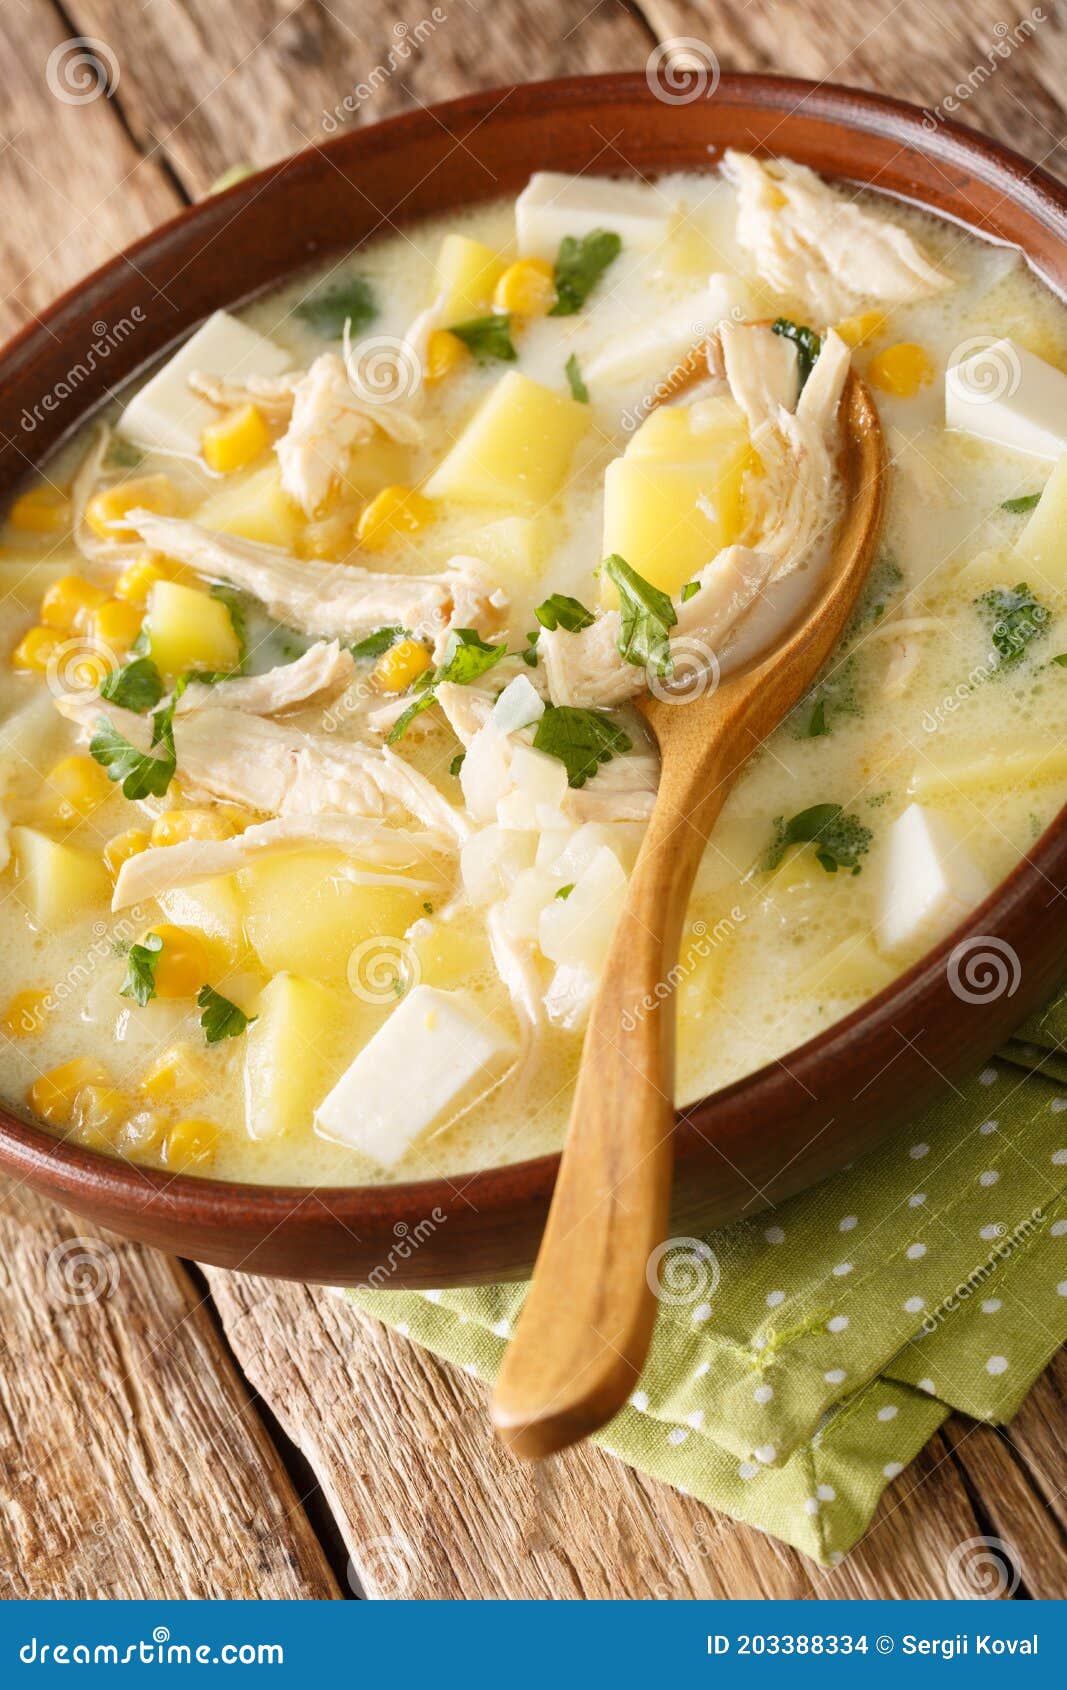 chupe andino is a traditional soup made from shredded chicken, cheese, vegetables and cream closeup in the plate. vertical